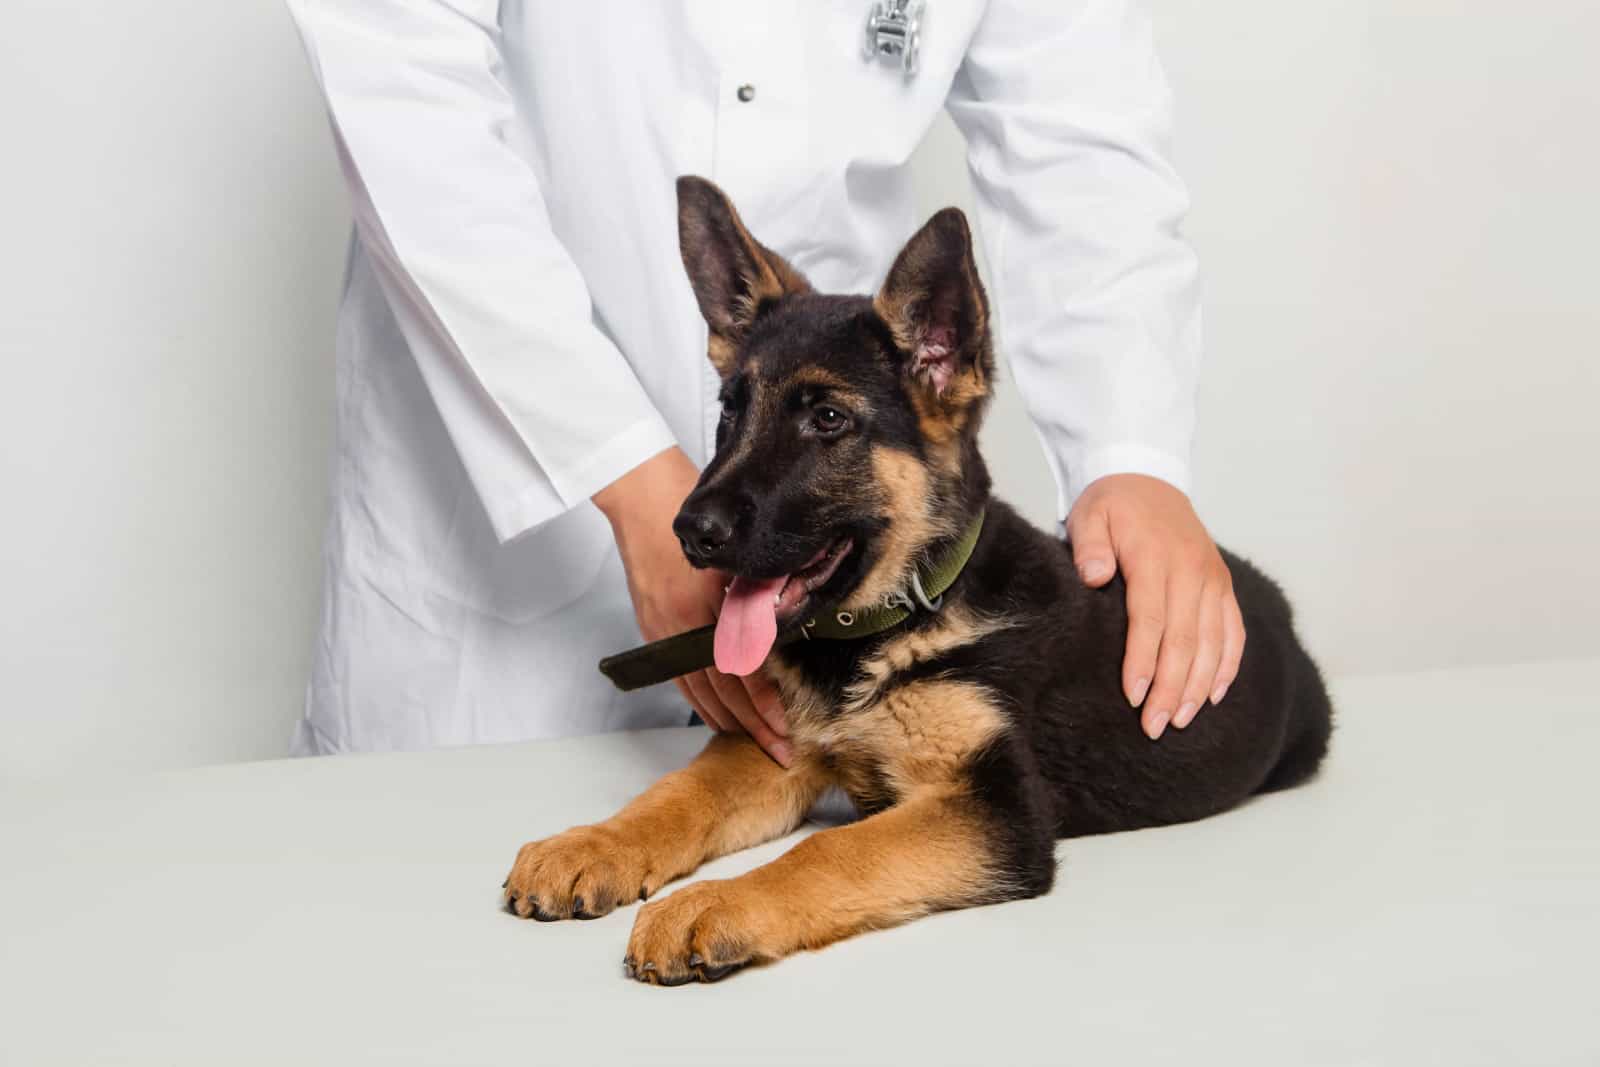 A puppy of a German shepherd on examination by a veterinarian in a clinic